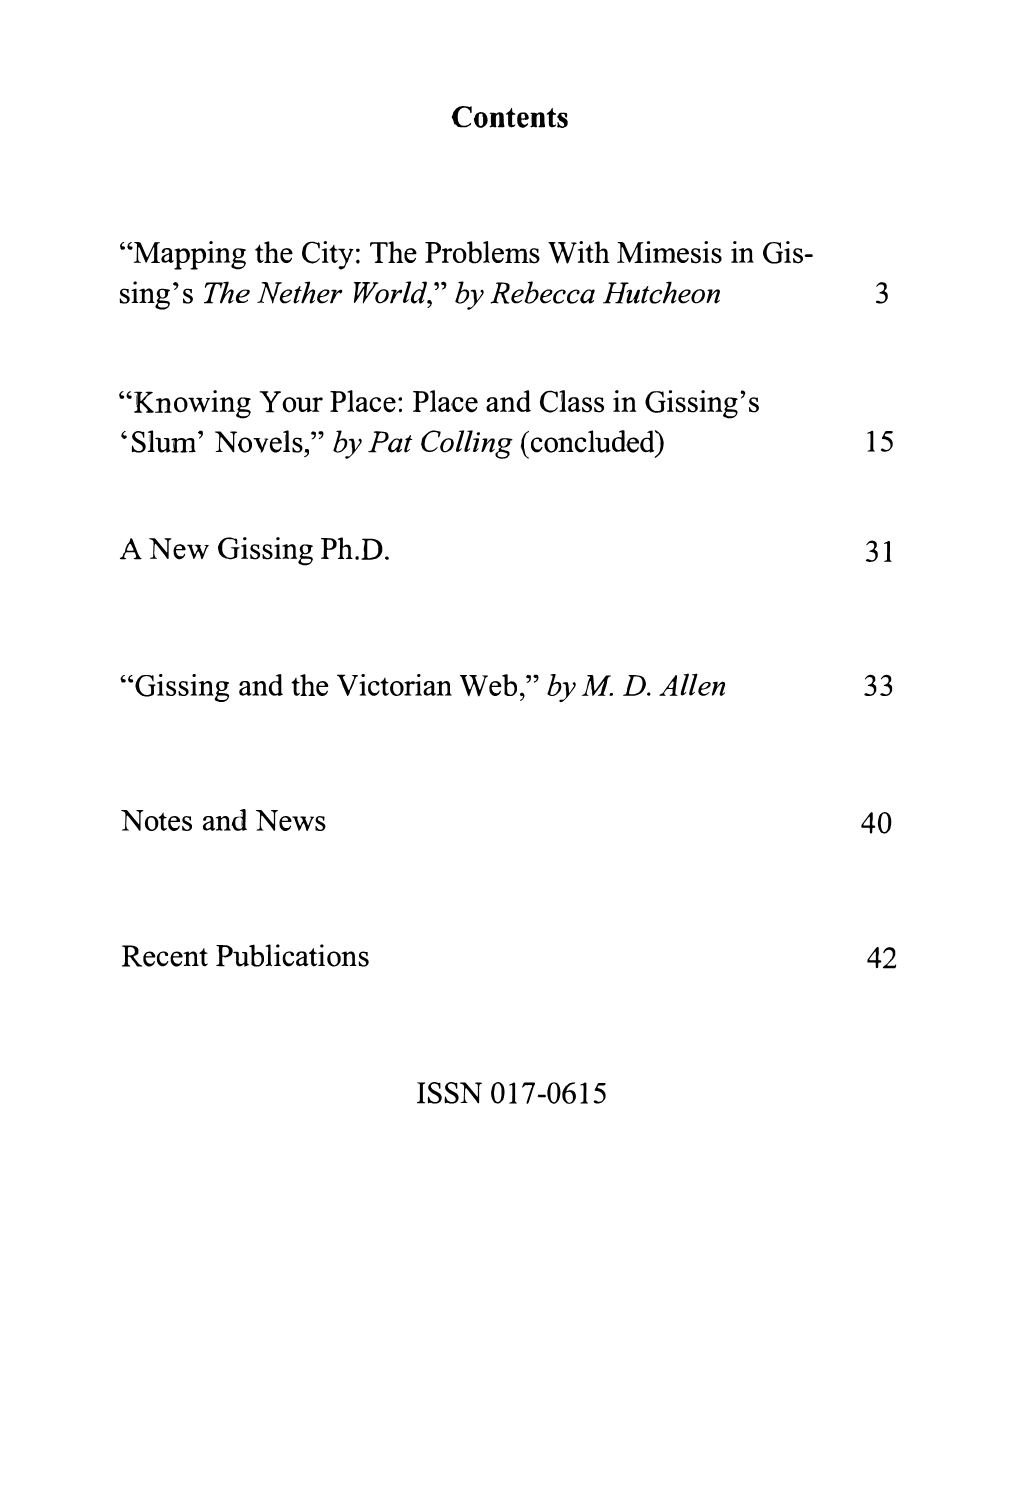 Place and Class in Gissing's 'Slum' Novels," by Pat Colling (Concluded) 15